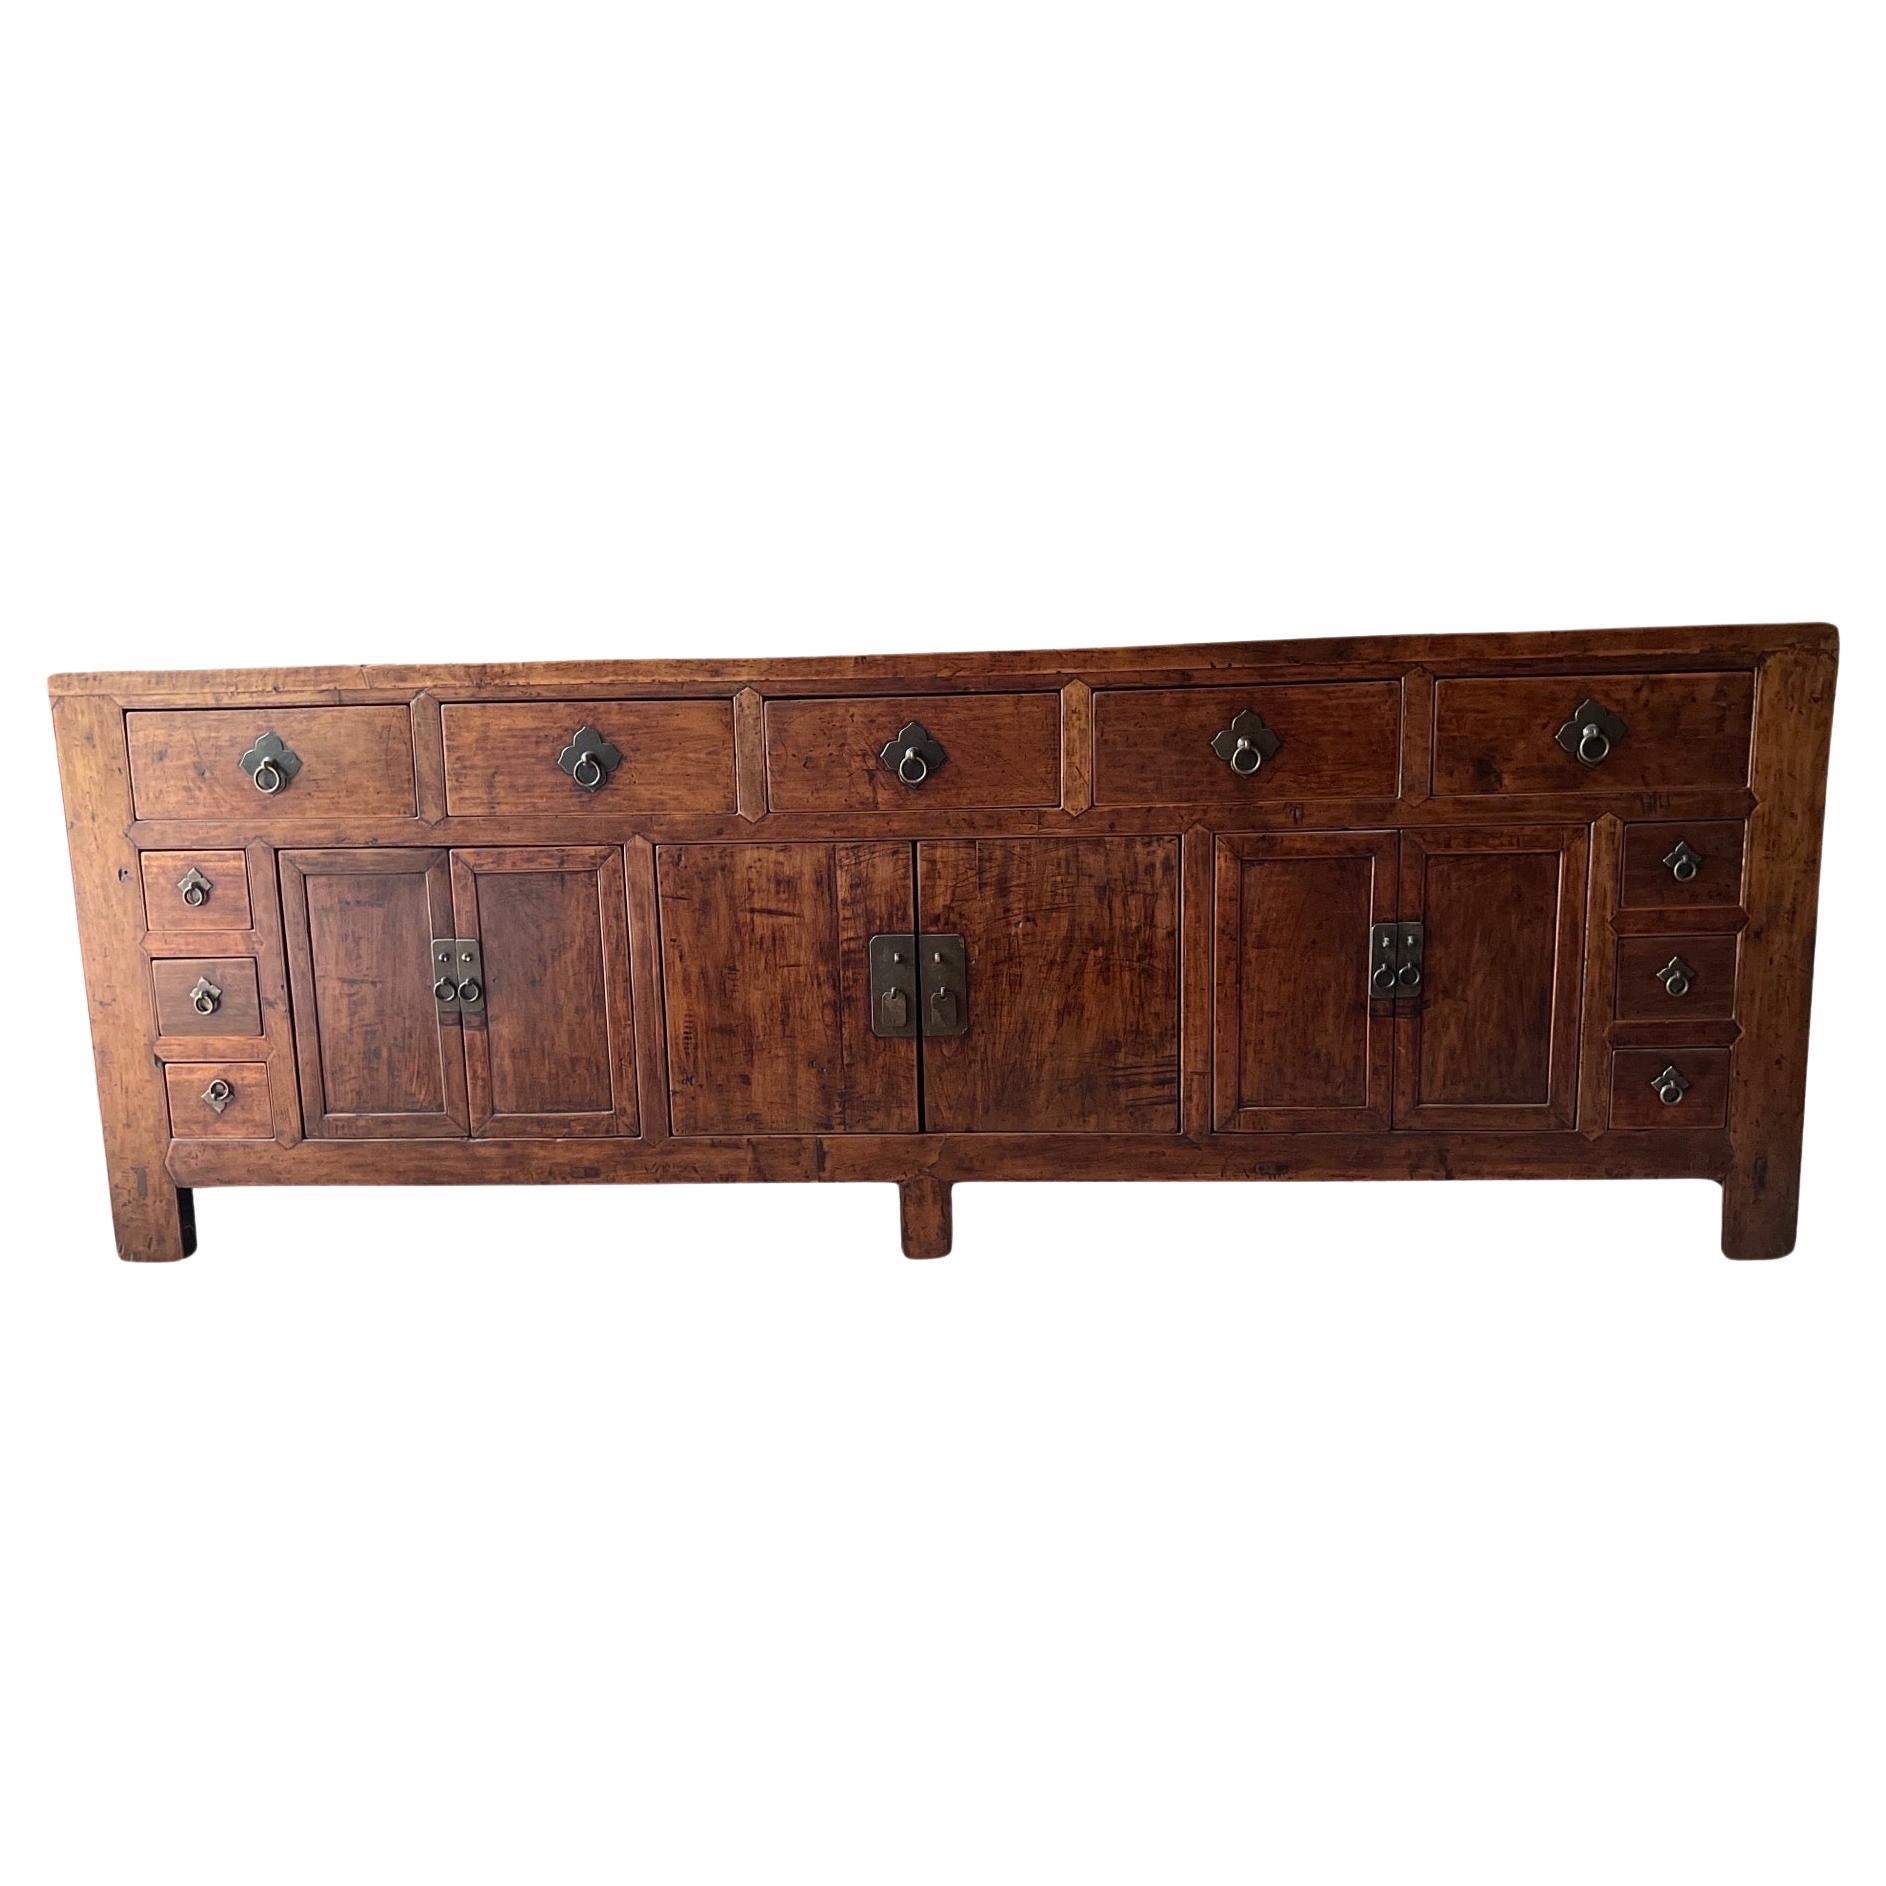 19th C. Monumental & Important Qing Dynasty Chinese Double Sided Sideboard For Sale